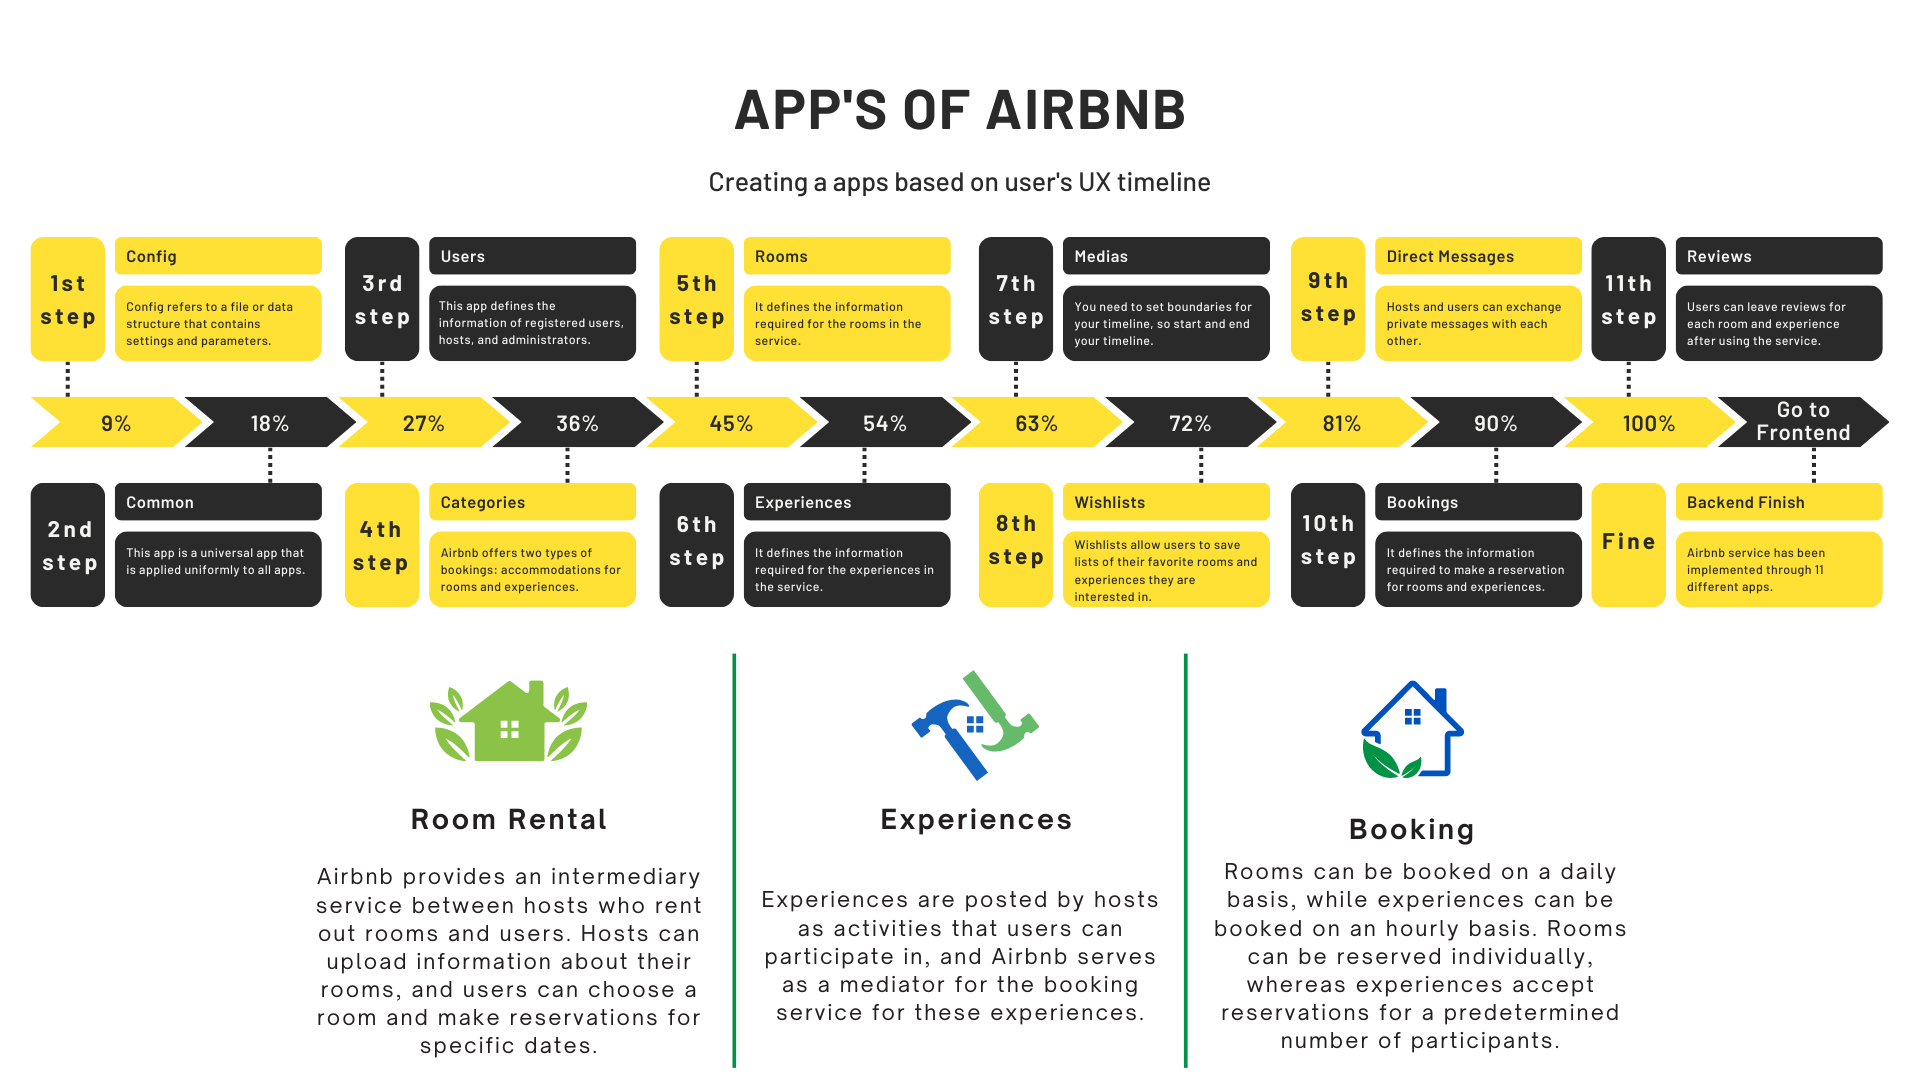 This iamge is about the apps in Airbnb